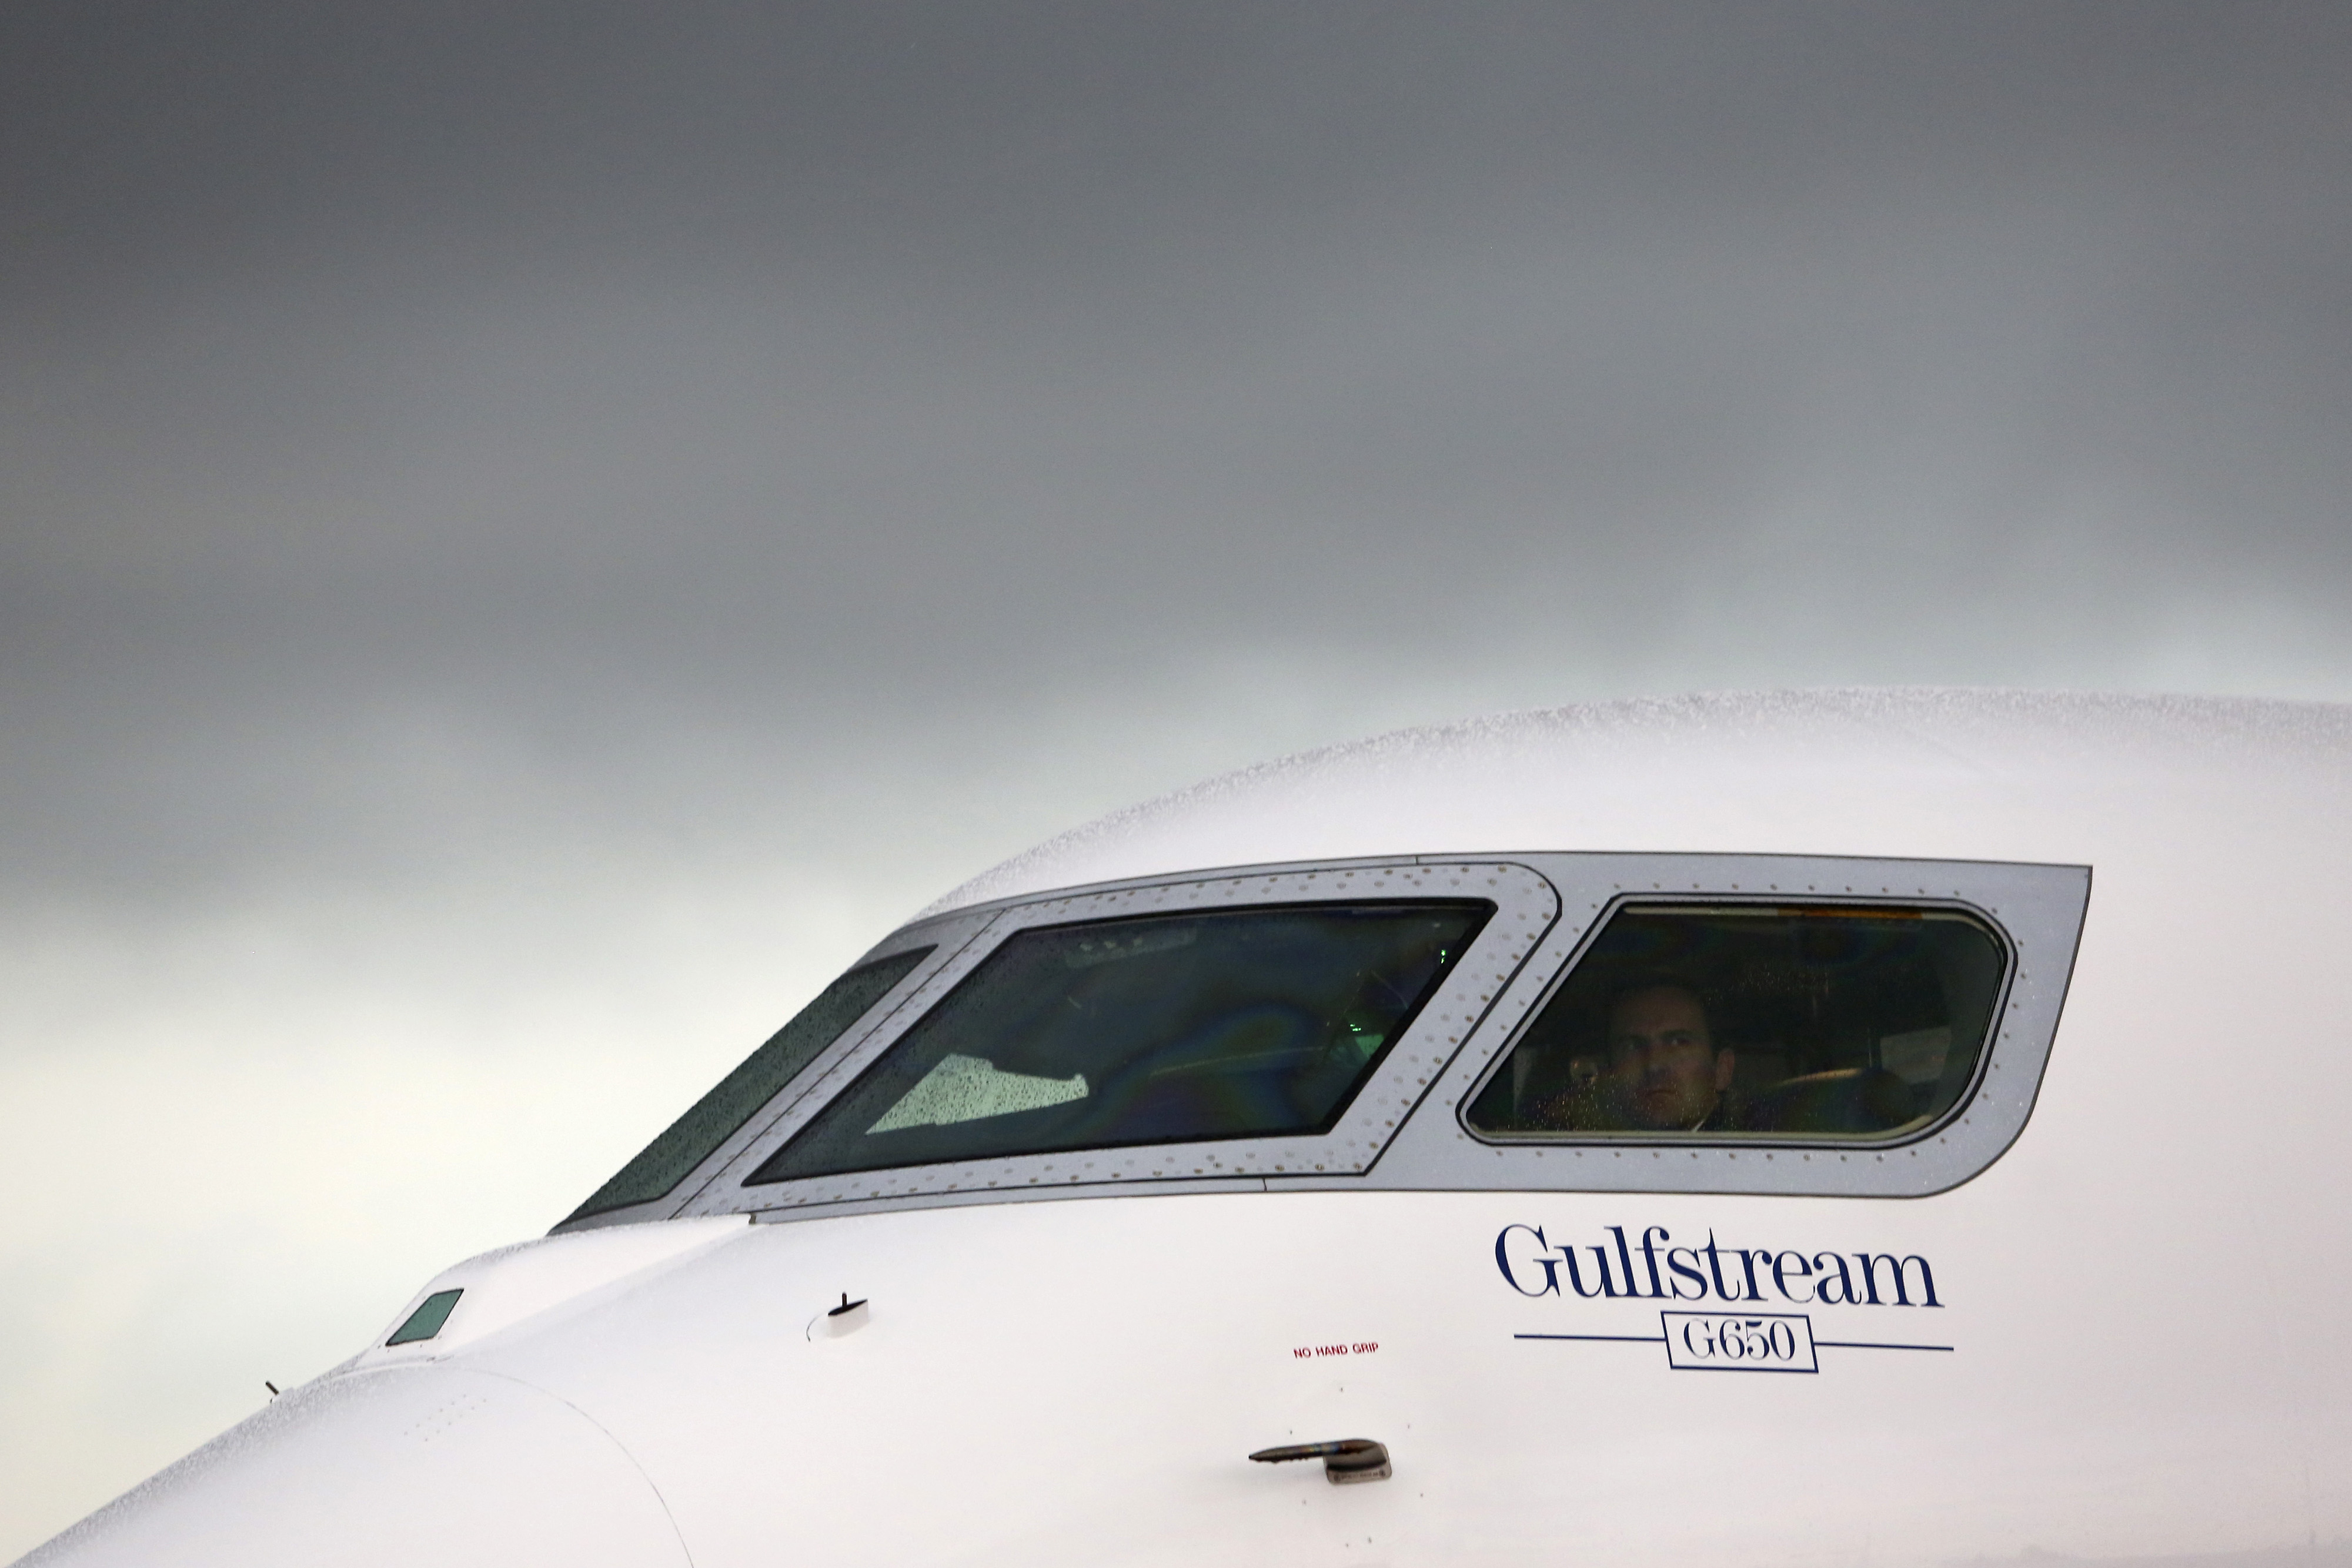 A logo sits beneath the cockpit window of a Gulfstream G650 business jet, manufactured by General Dynamics Corp., on the first day of the Paris Air Show in Paris on June 17, 2013.